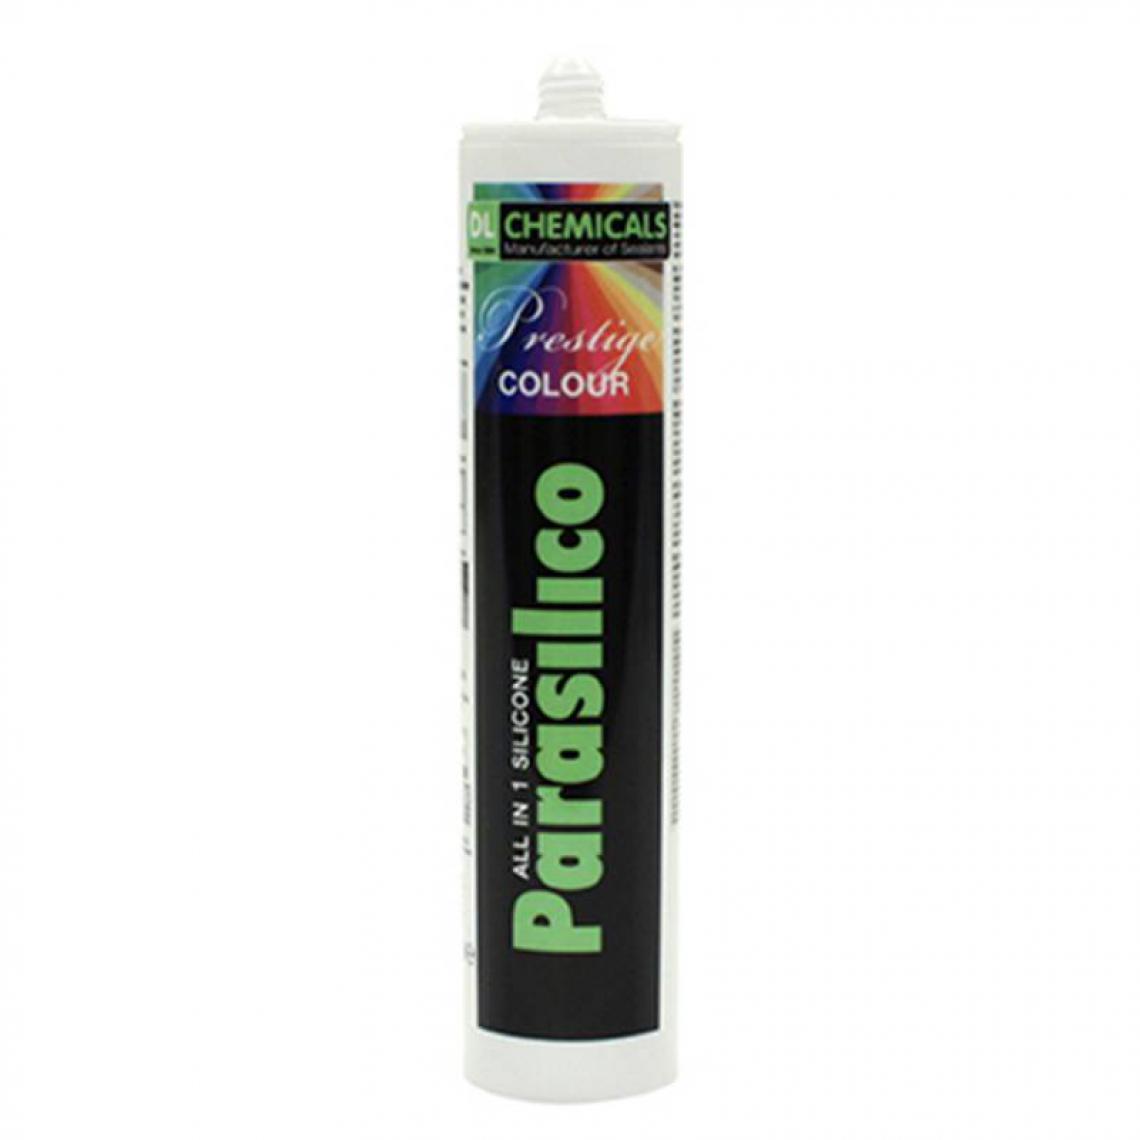 Dl Chemicals - Silicone Parasilico Prestige colour blanc RAL9010 300 mL - Mastic, silicone, joint